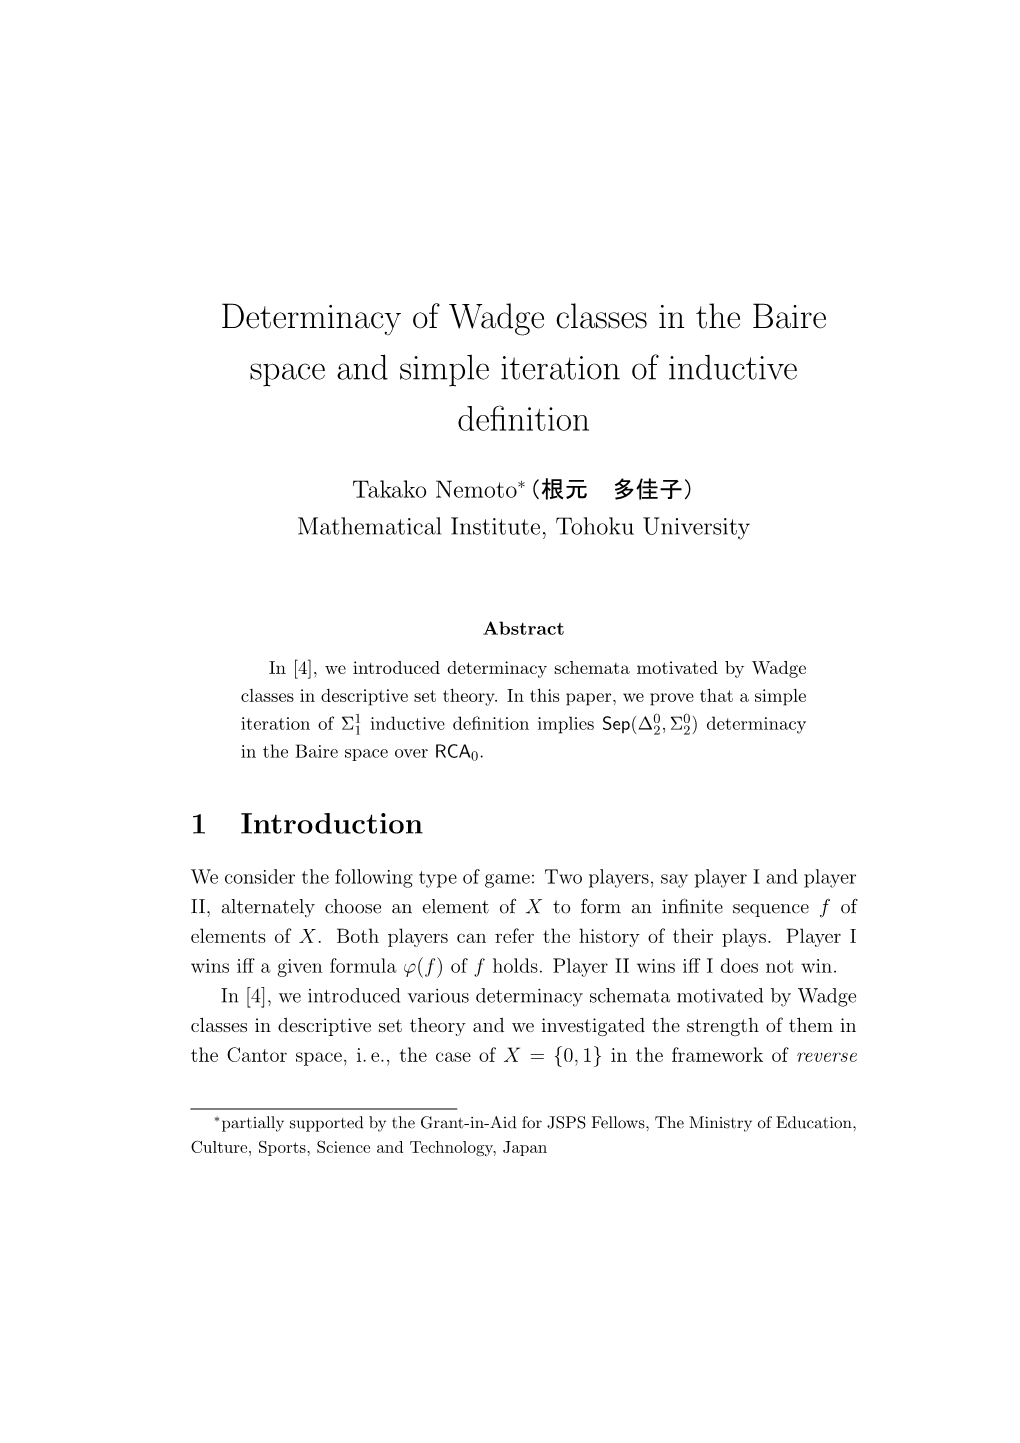 Determinacy of Wadge Classes in the Baire Space and Simple Iteration of Inductive Definition